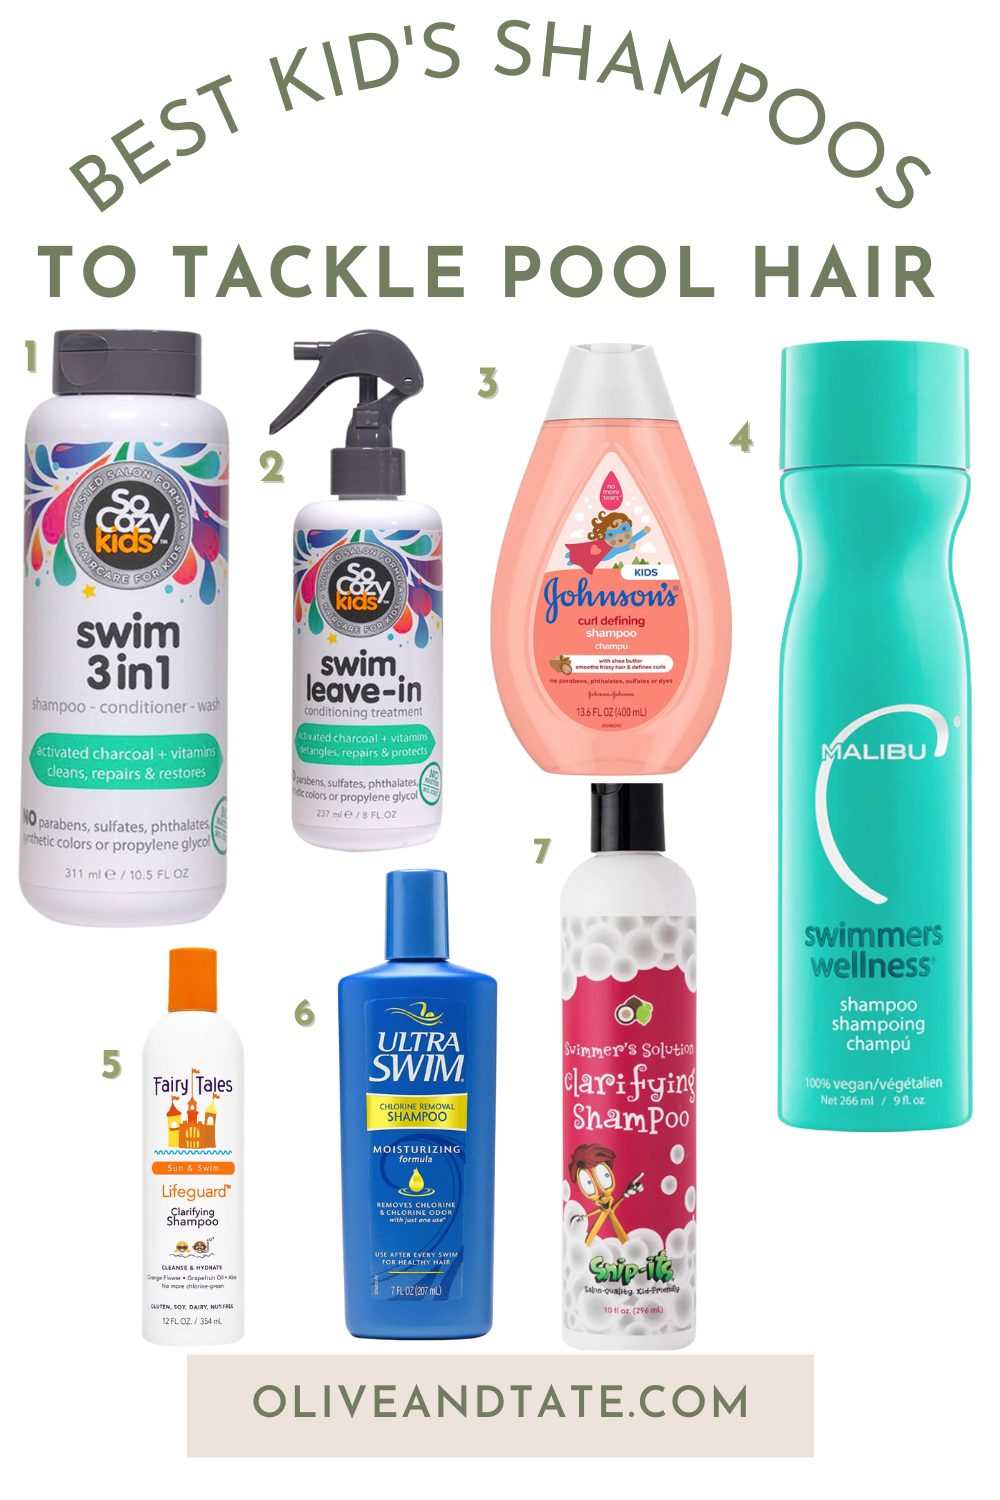 Best Kid's Shampoos To Tackle Pool Hair